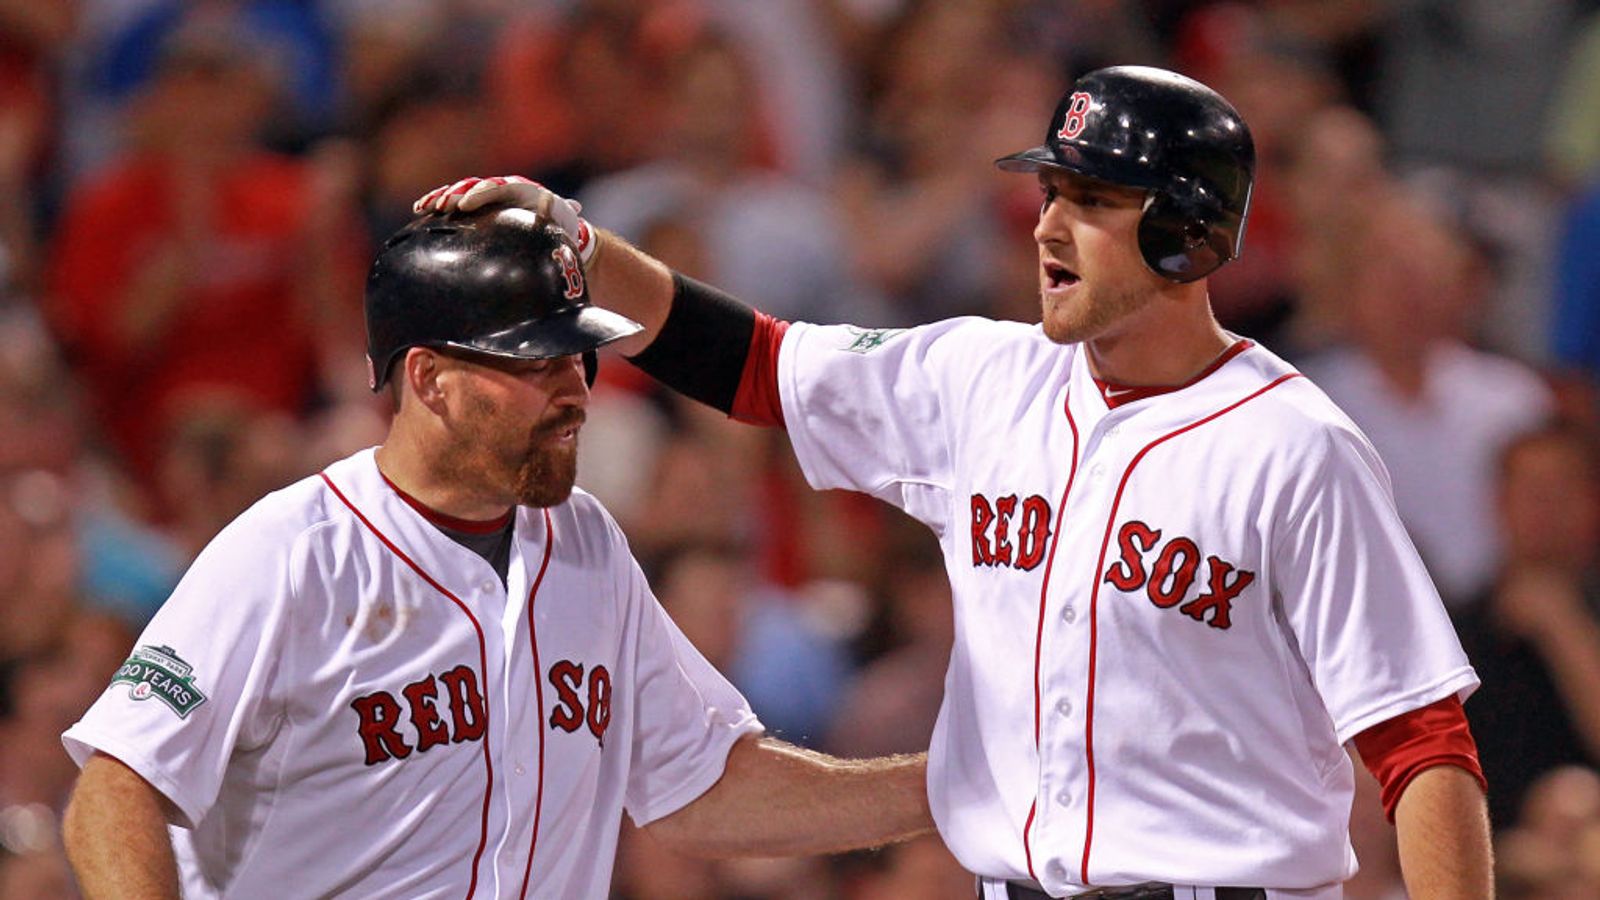 McAdam: NESN in discussions with Youkilis, Middlebrooks for Red